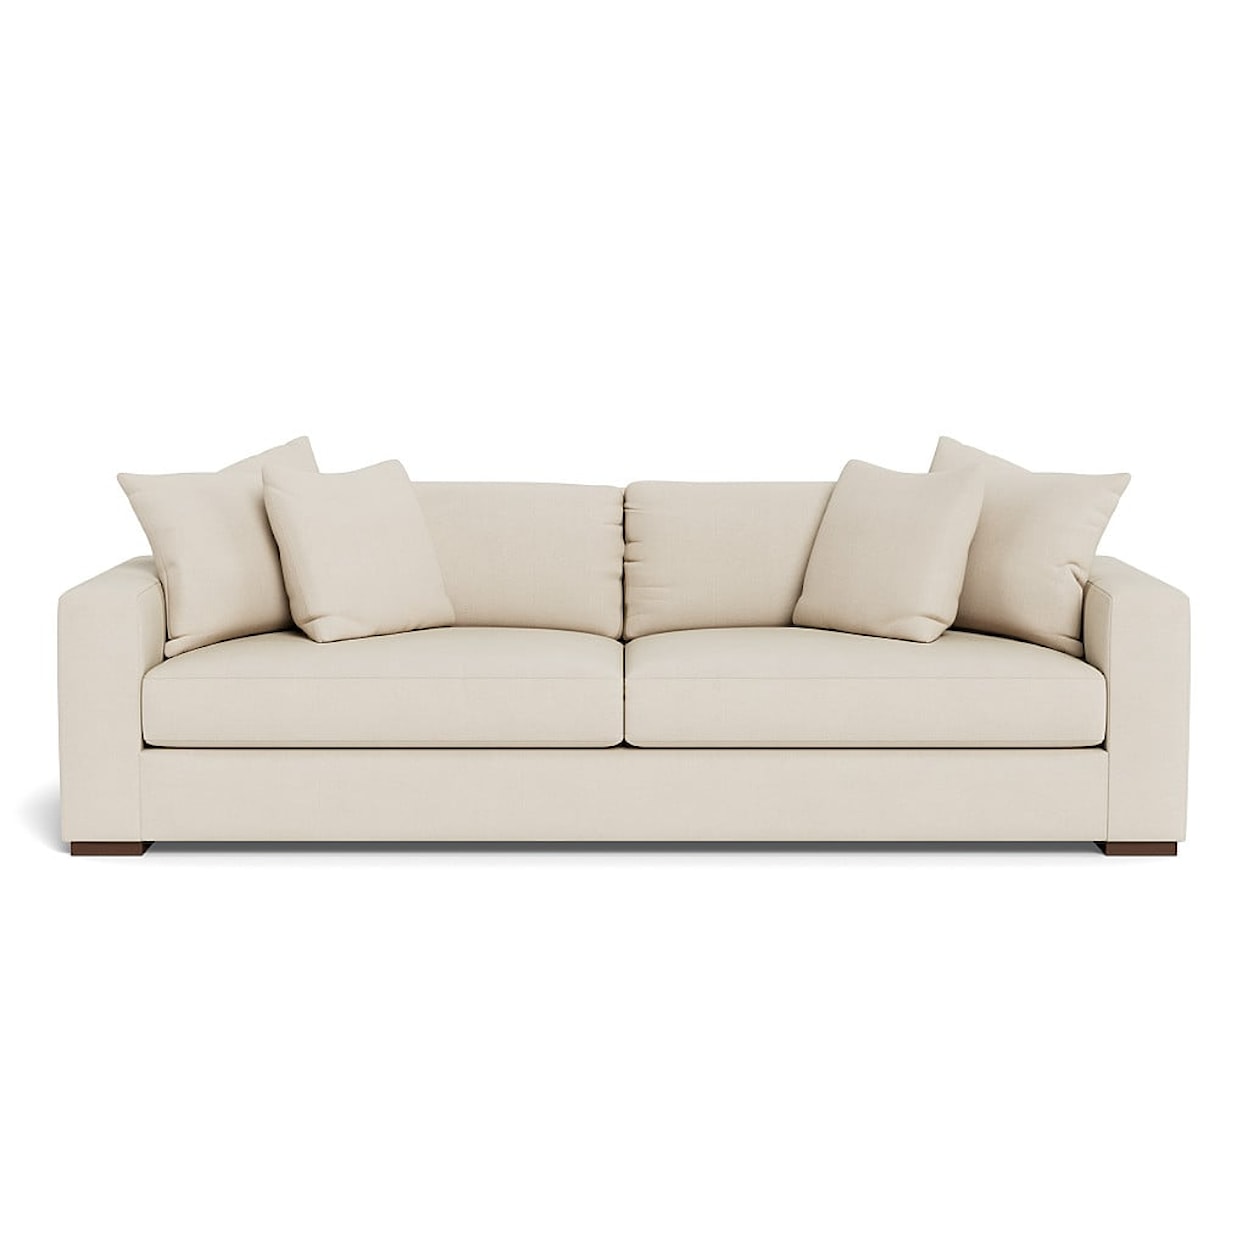 Universal Special Order The Social Sofa